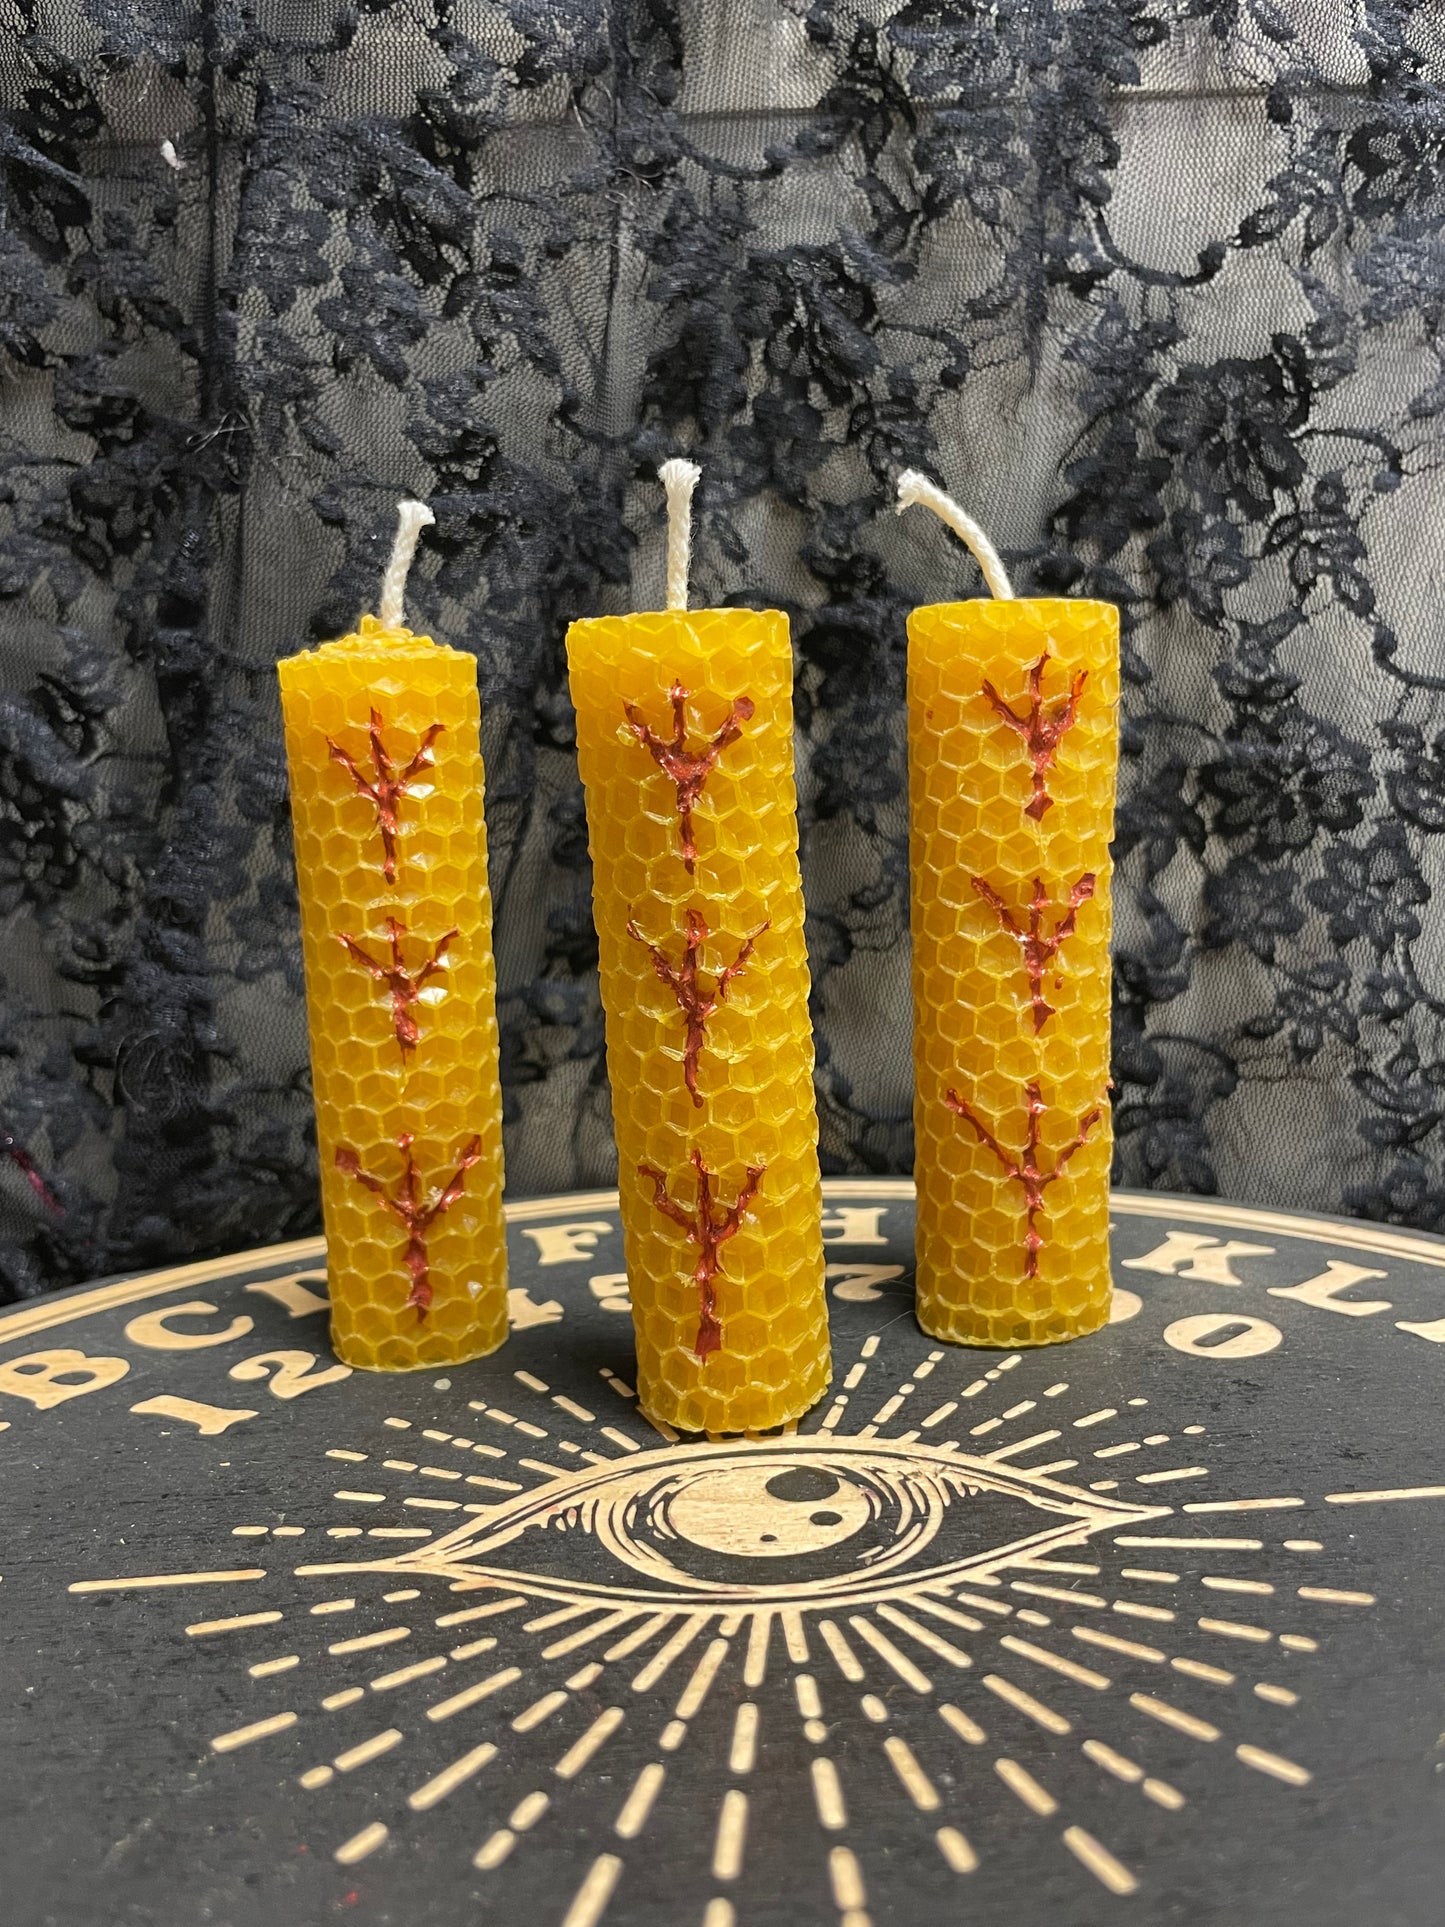 Protection Rune Beeswax Pillar Candle, 6 inch, Rolled Beeswax, Carved and Painted Candle